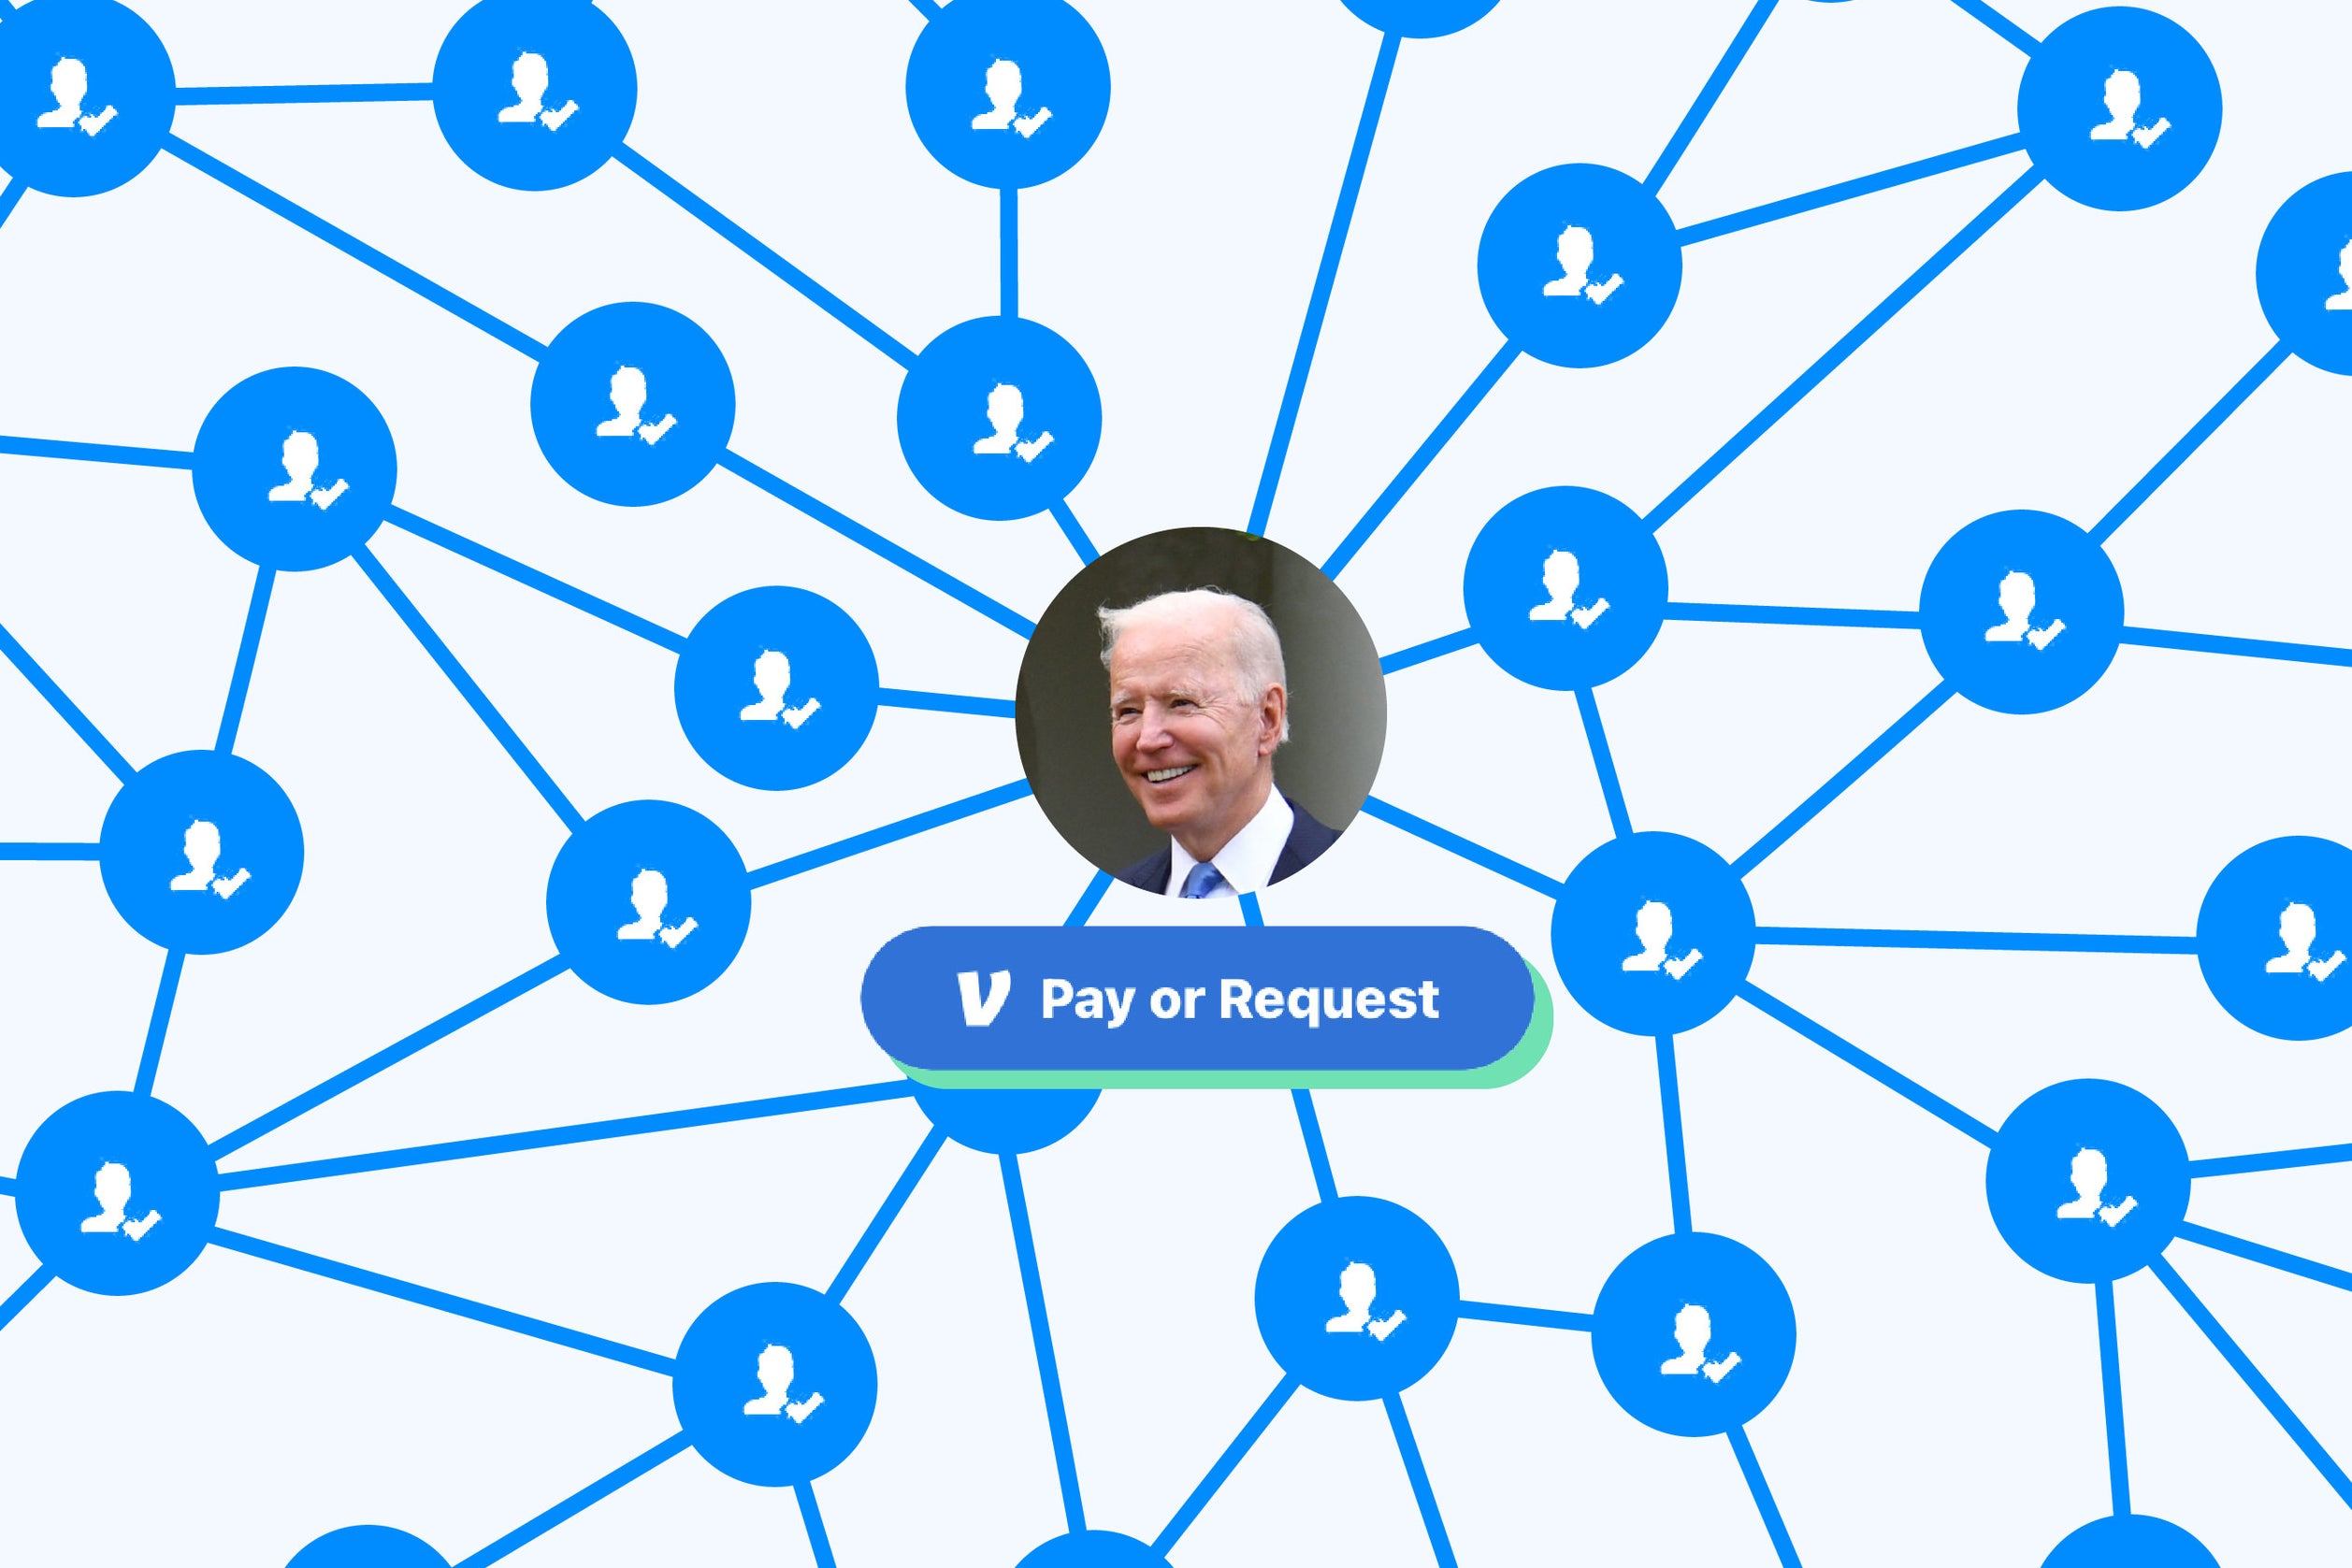 We Found Joe Biden’s Secret Venmo Account. Here’s Why That’s A Privacy Nightmare For Everyone. thumbnail